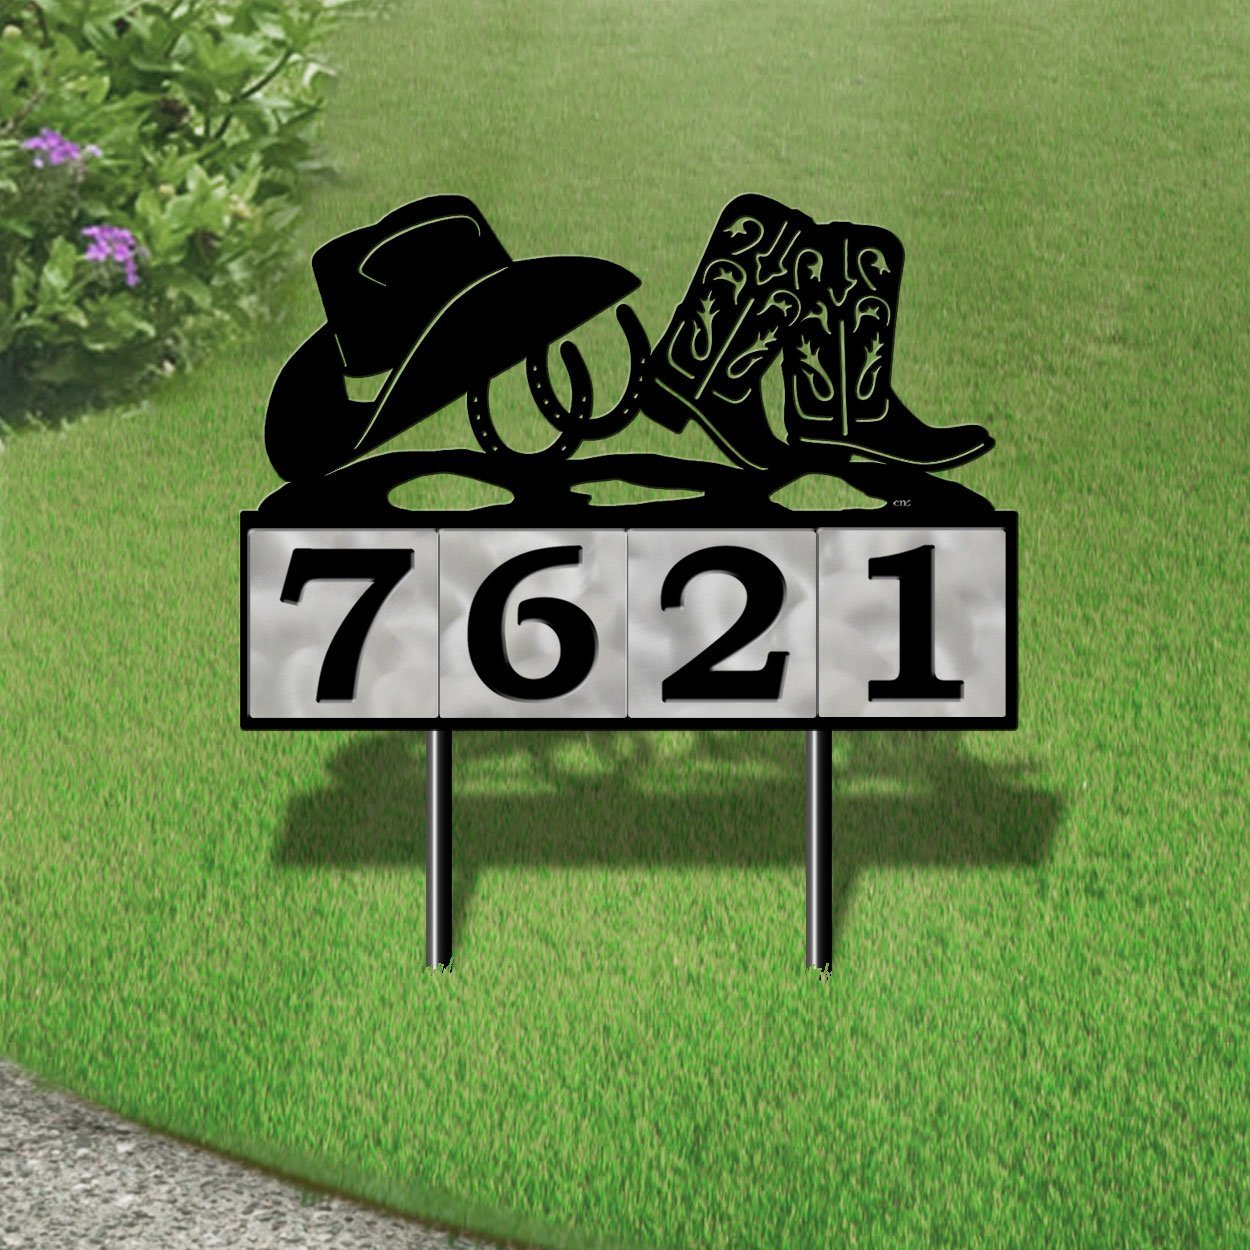 610044 - Horseshoes and Hat 4-Digit Horizontal 6in Tiles Yard Sign